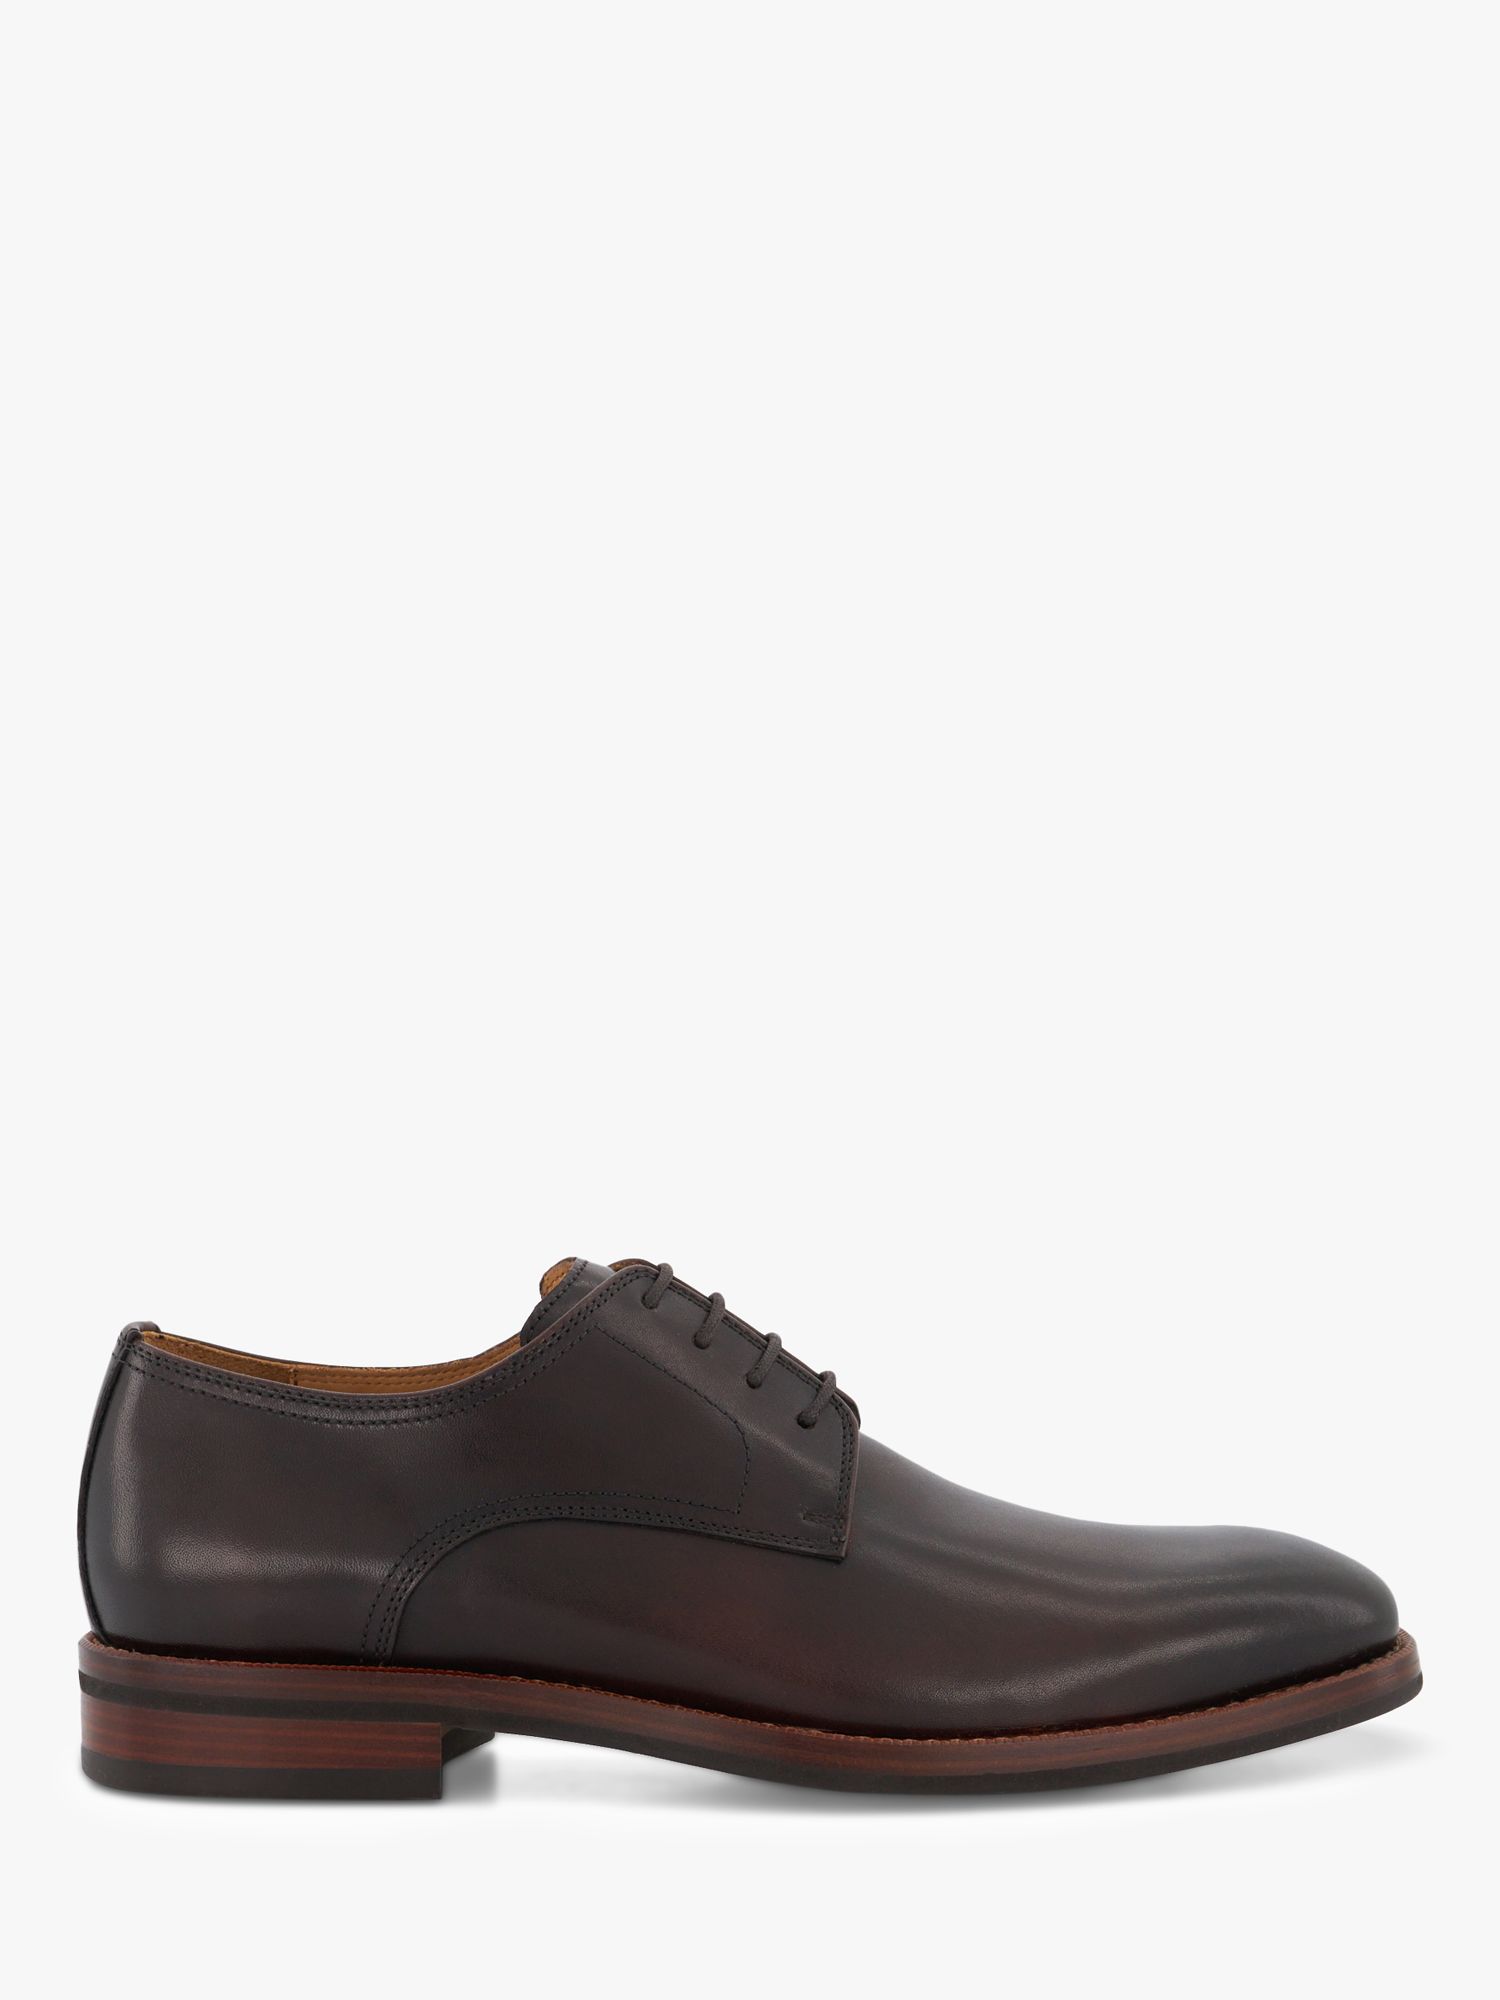 Dune Sinclairs Lace Up Gibson Shoes, Dark Brown-leather at John Lewis ...